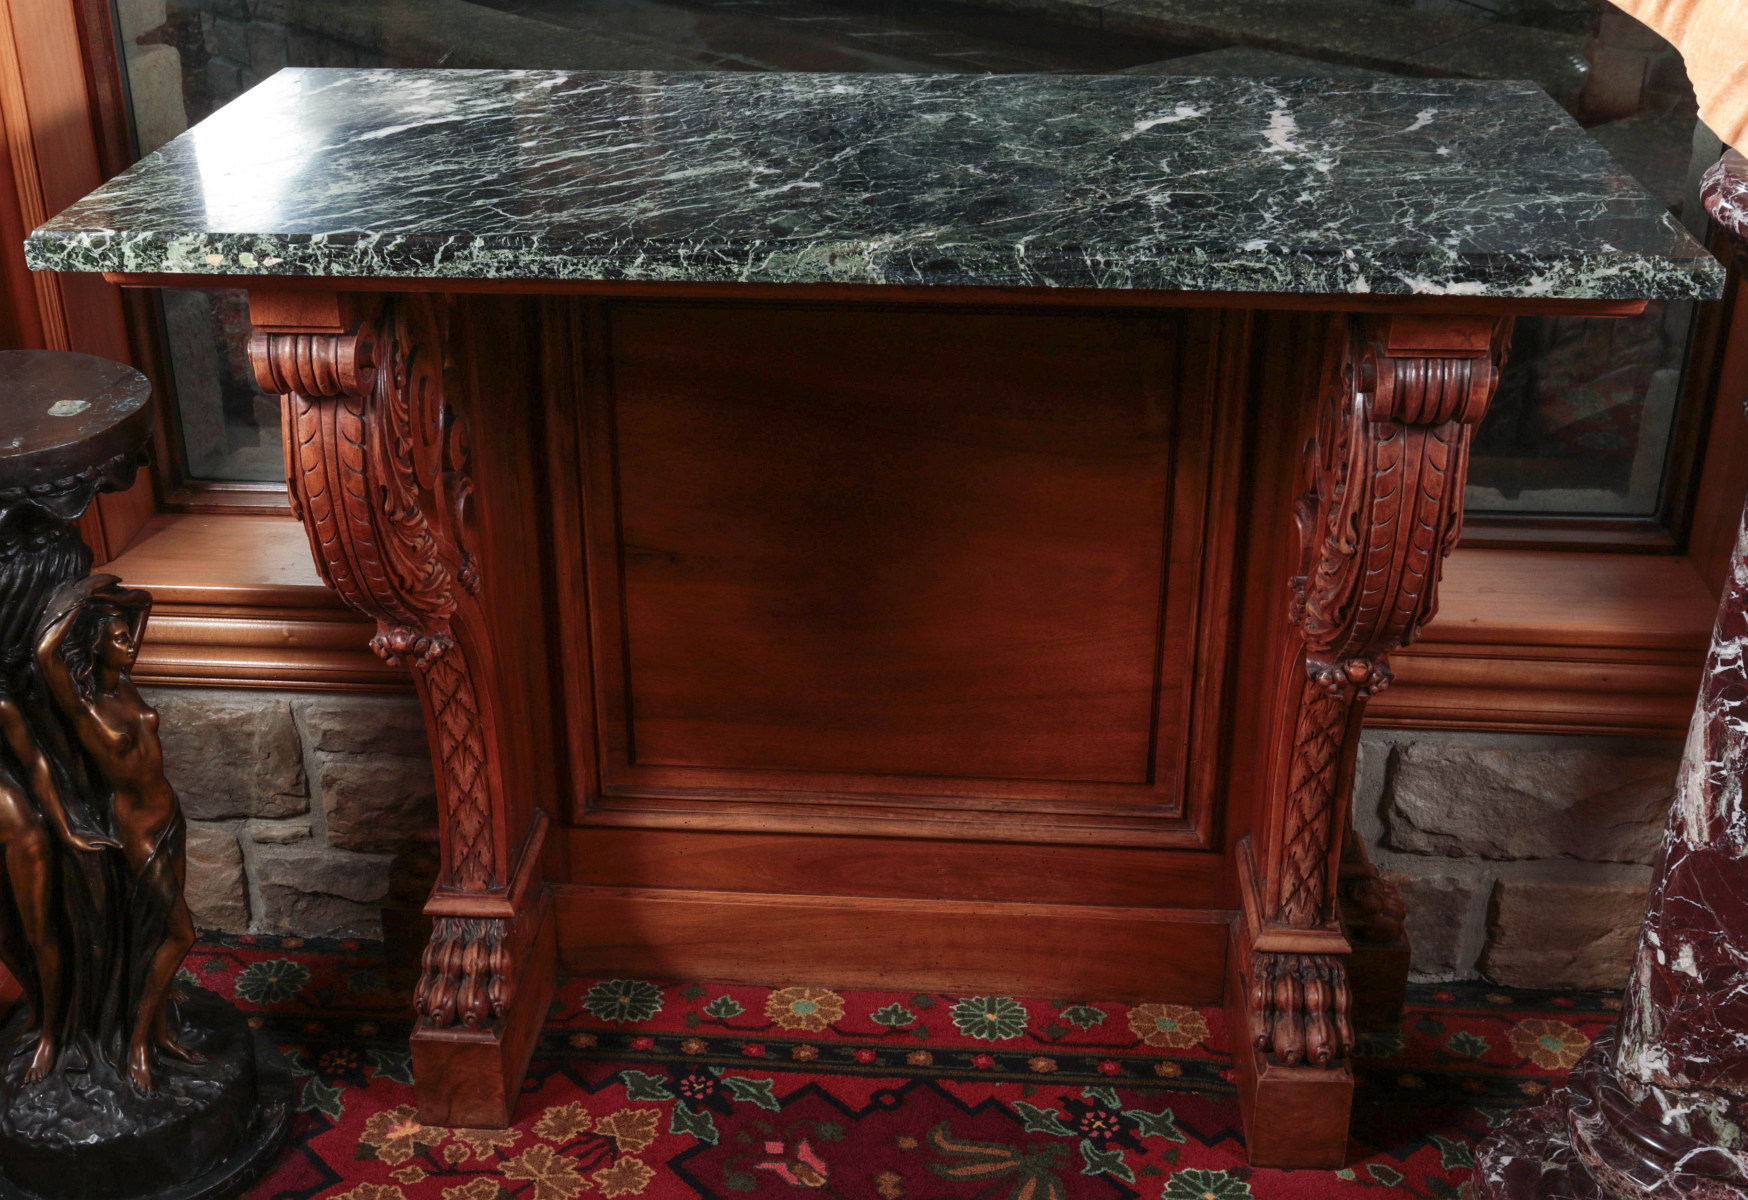 A HANDSOME CARVED MAHOGANY CONSOLE WITH MARBLE TOP